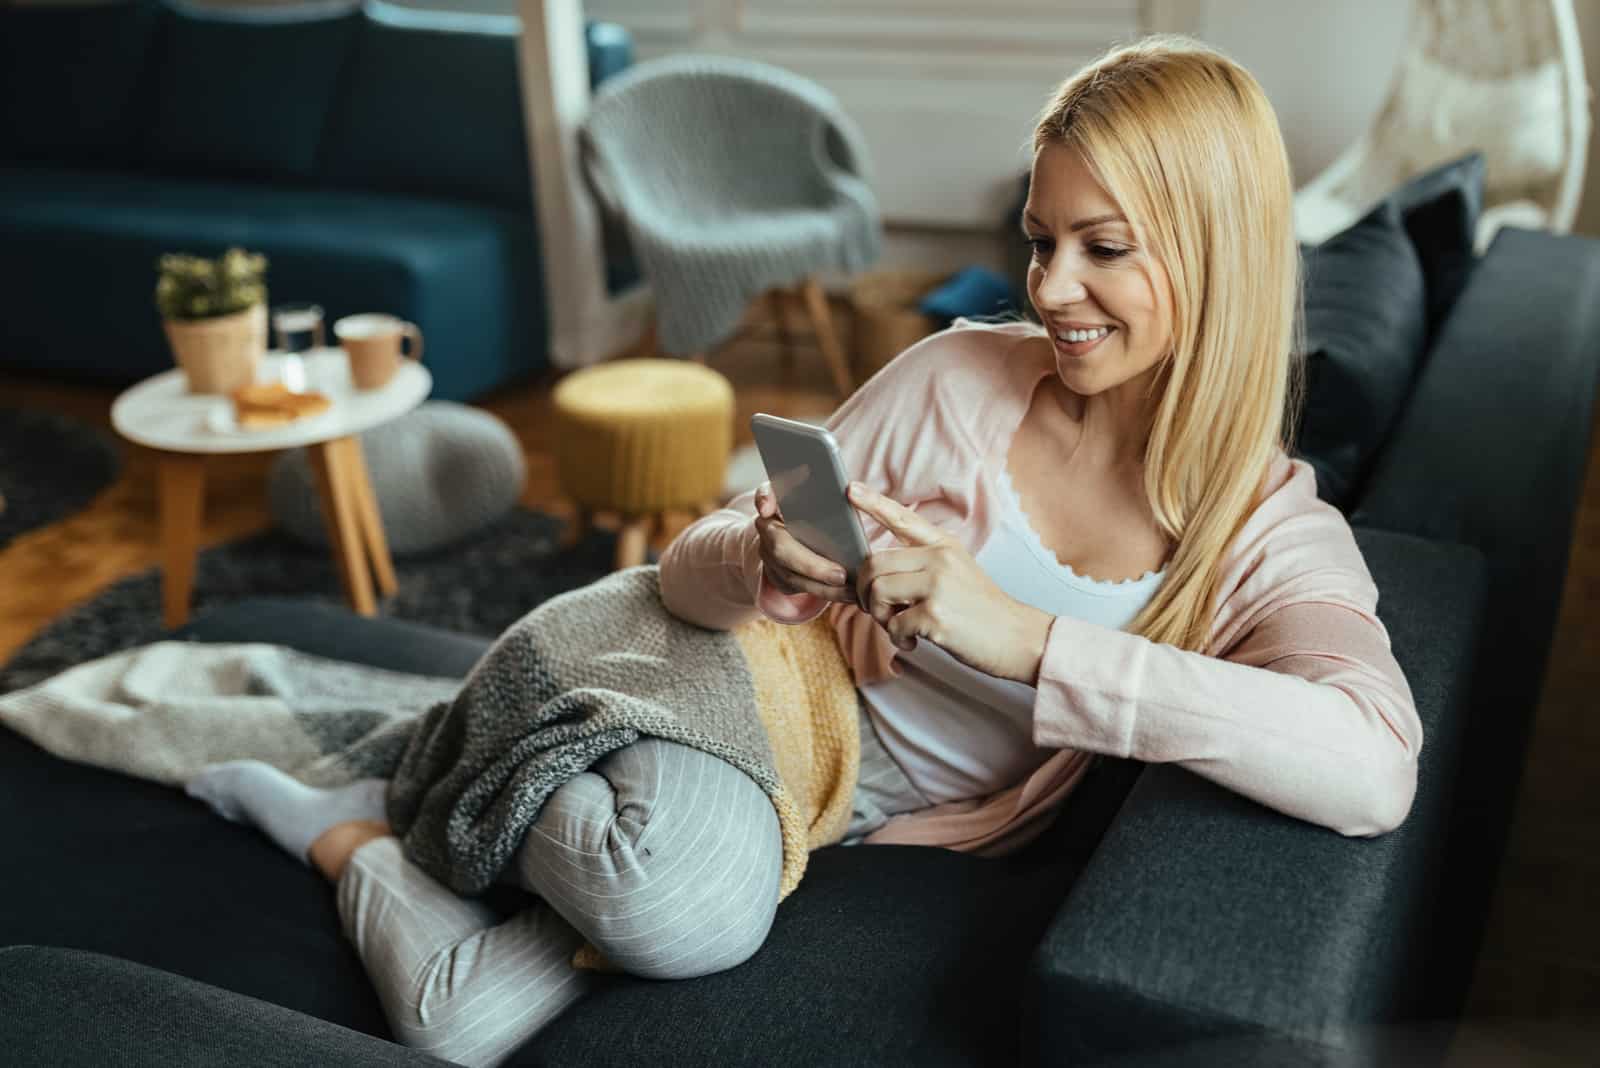 a beautiful woman with long blonde hair lies on the couch and buttons on the phone